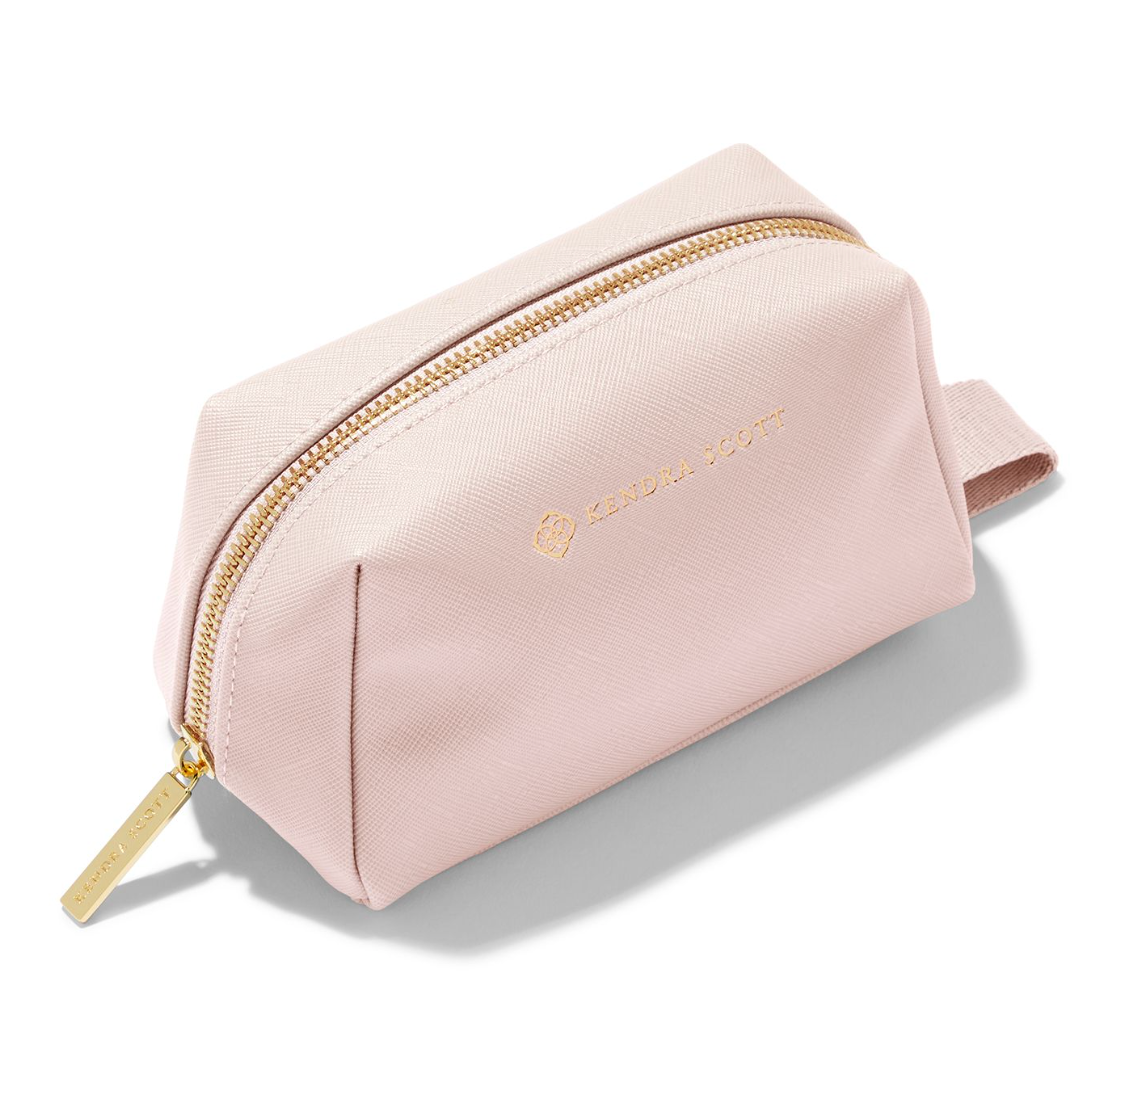 Small Cosmetic Zip Case in Light Pink | KENDRA SCOTT - The Street Boutique 